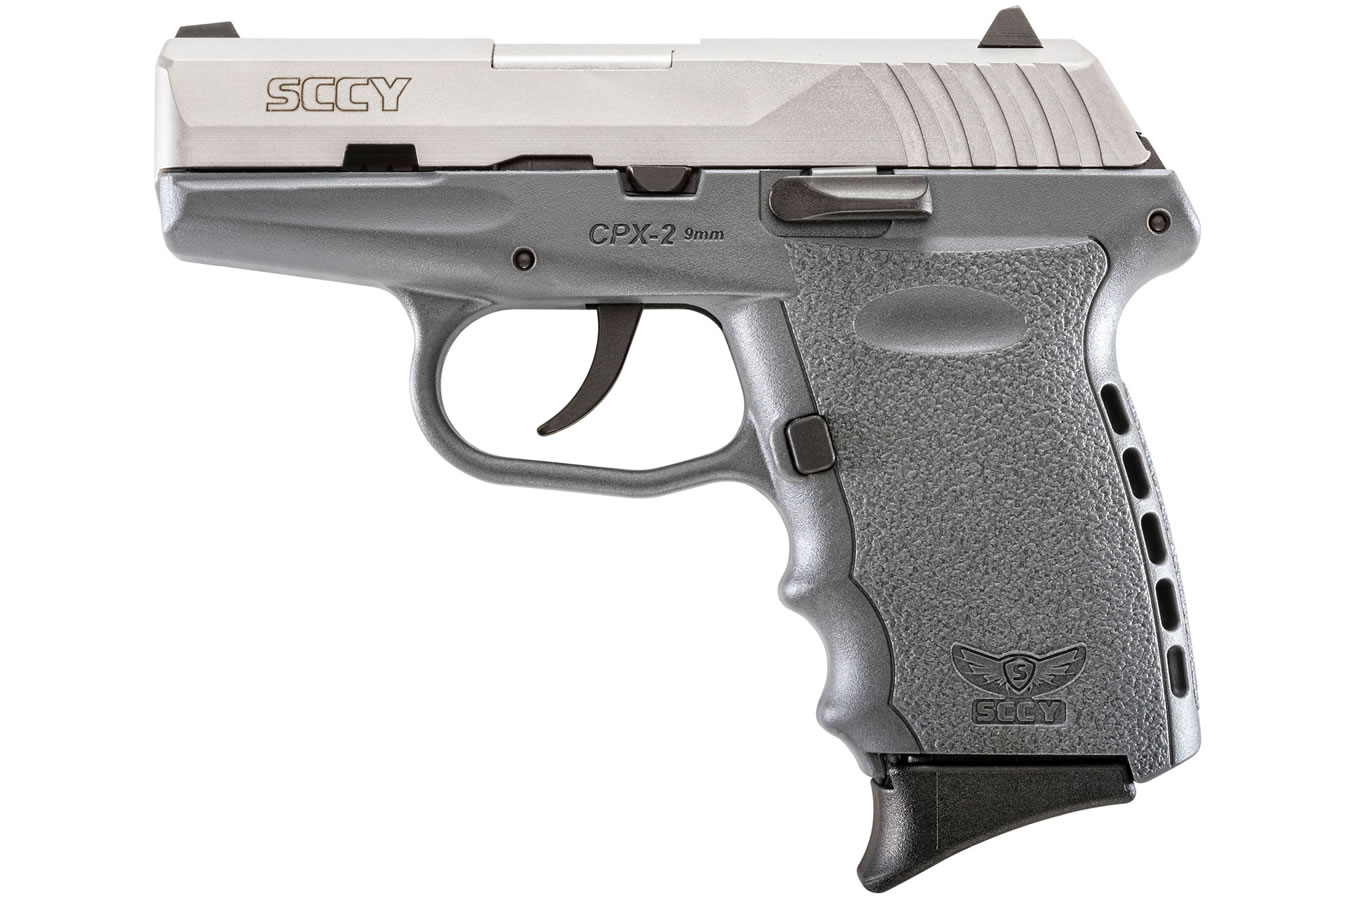 No. 8 Best Selling: SCCY CPX2 9MM WITH SNIPER GRAY FRAME